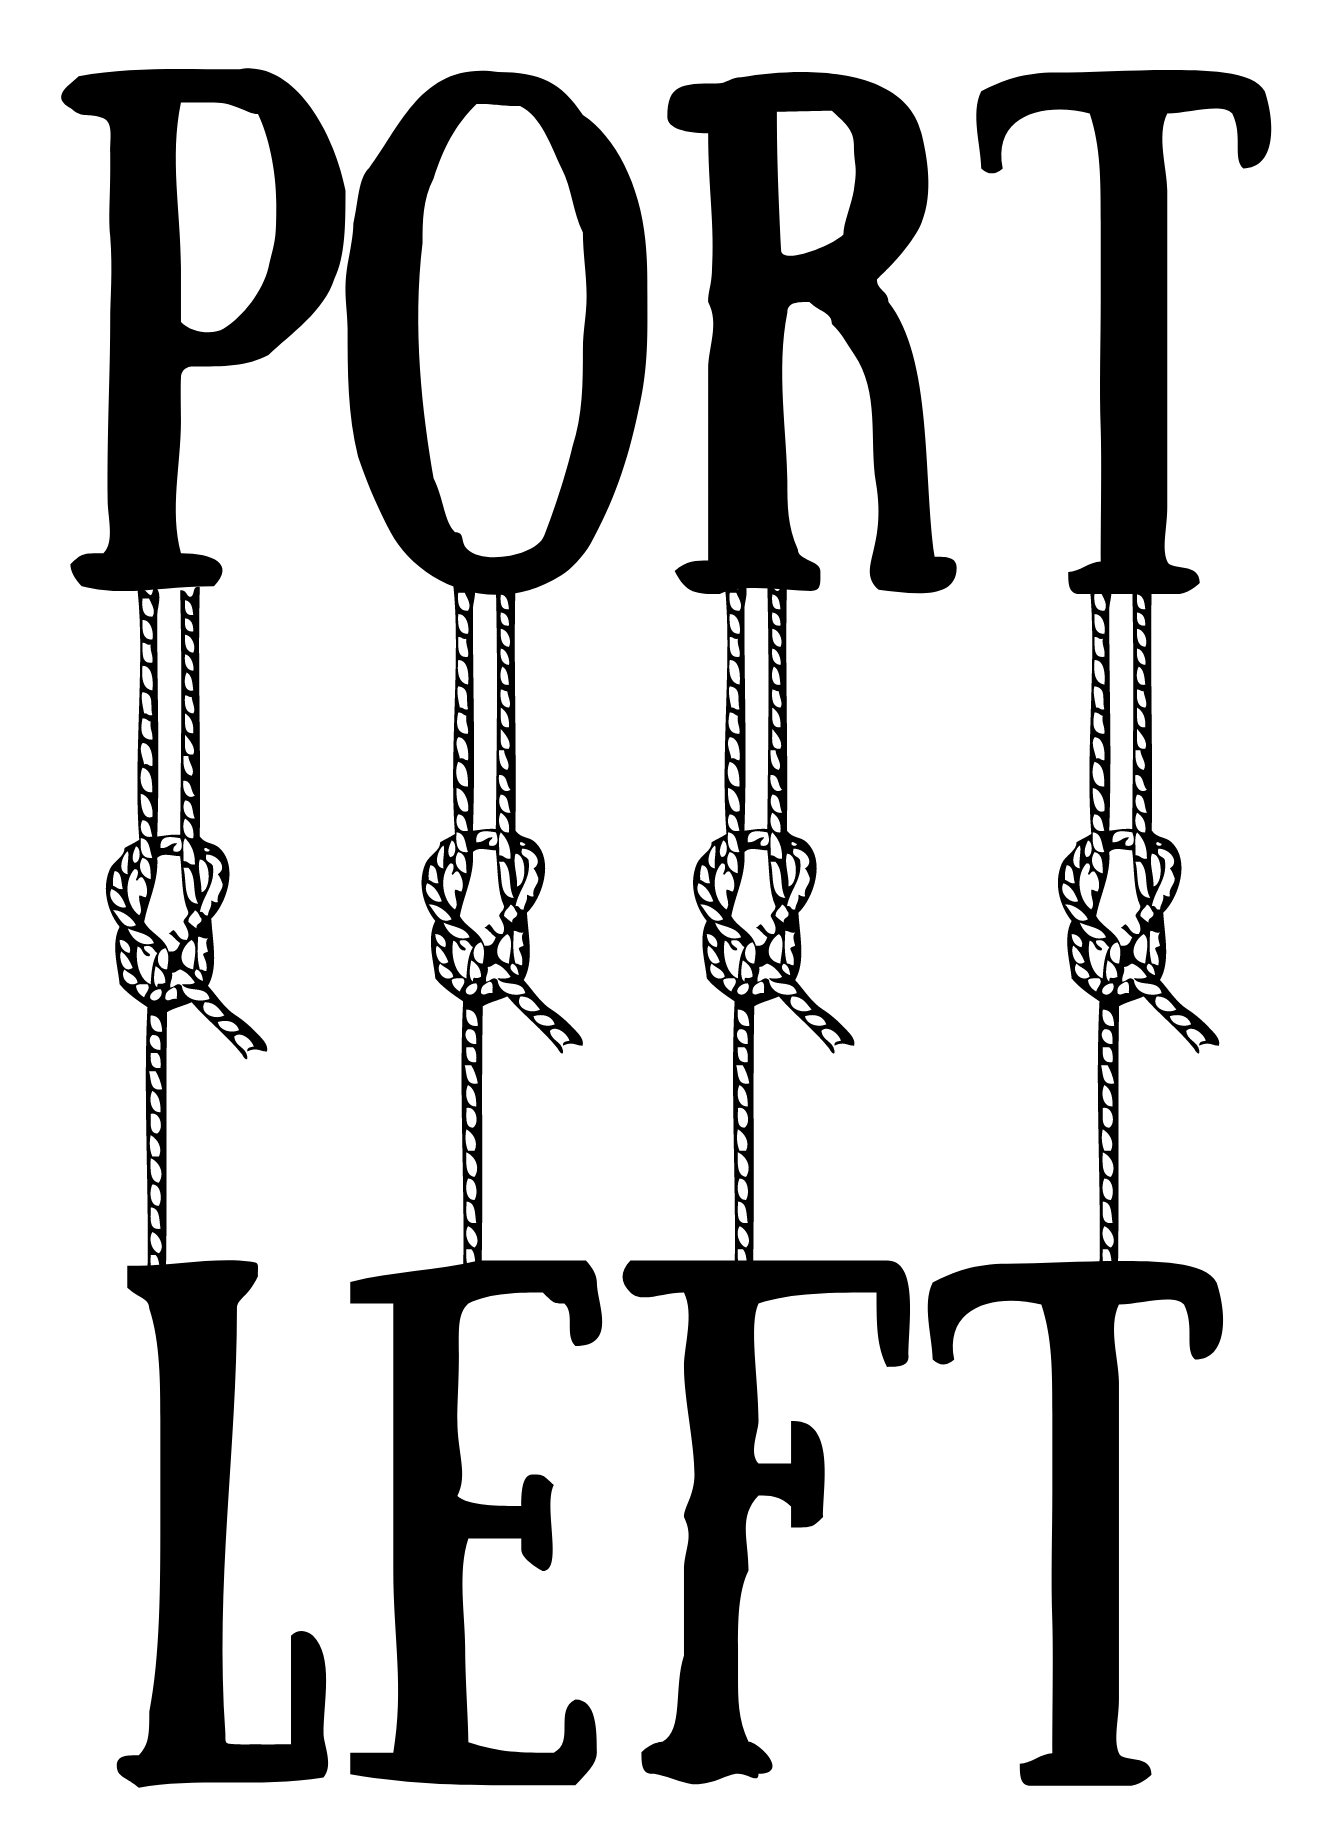 Port and Starboard - port has four letters like LEFT